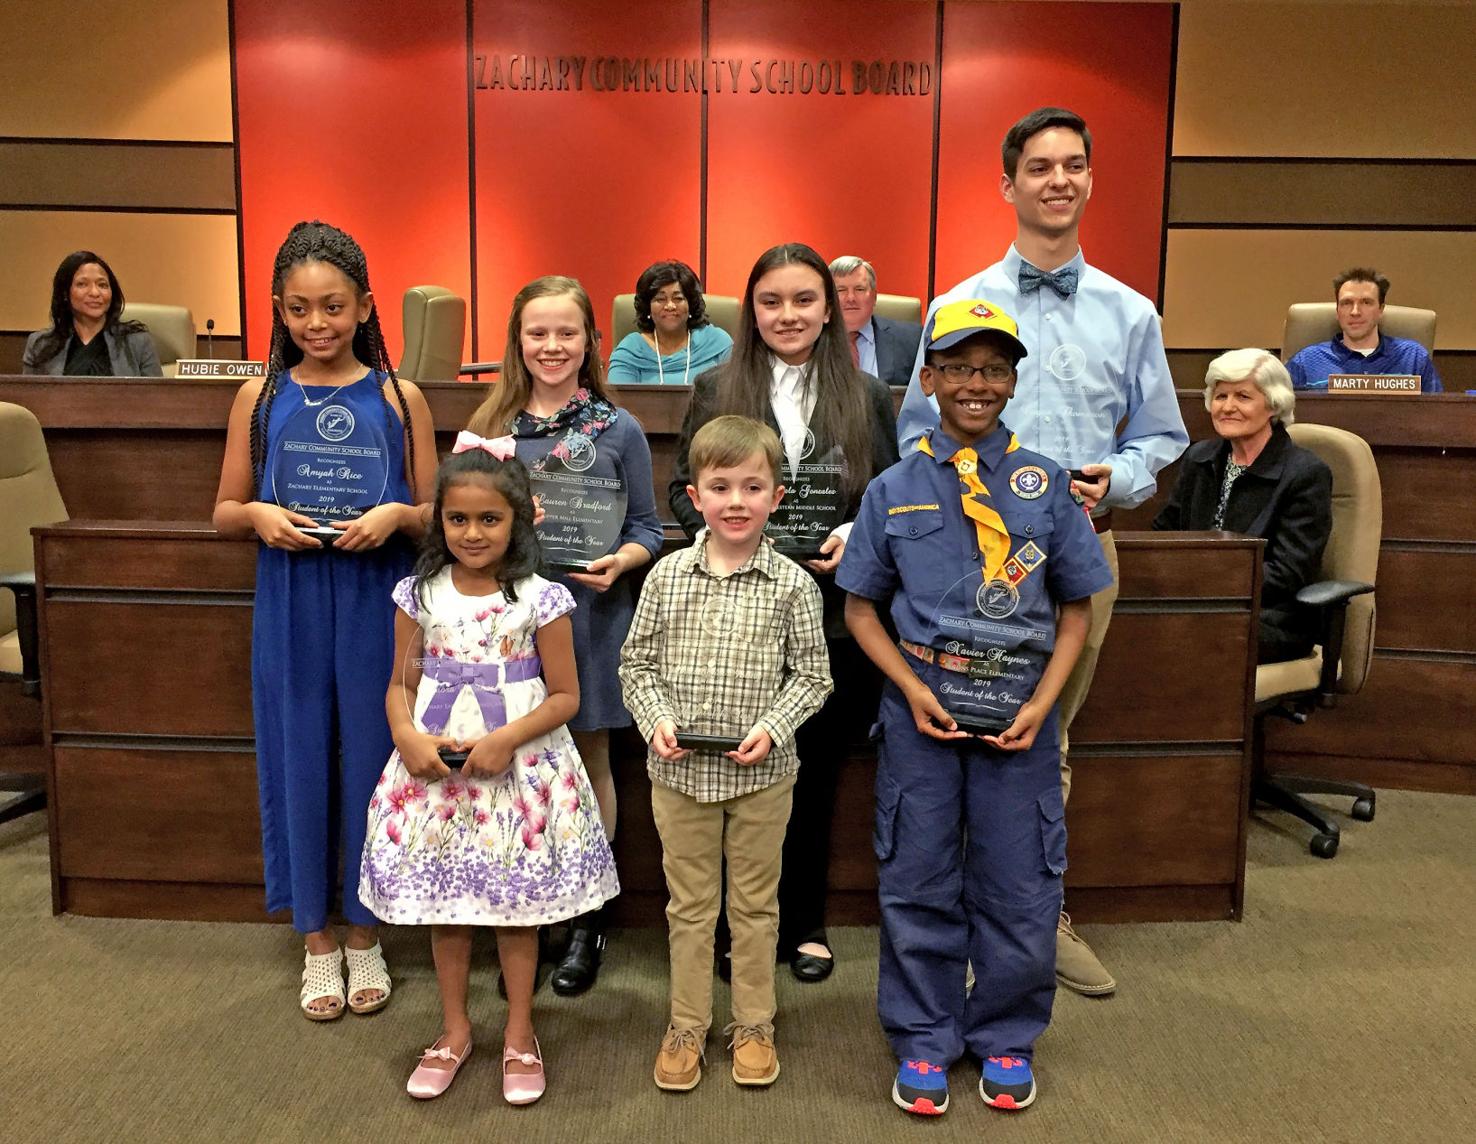 Zachary School Board recognizes seven students of the year | Zachary